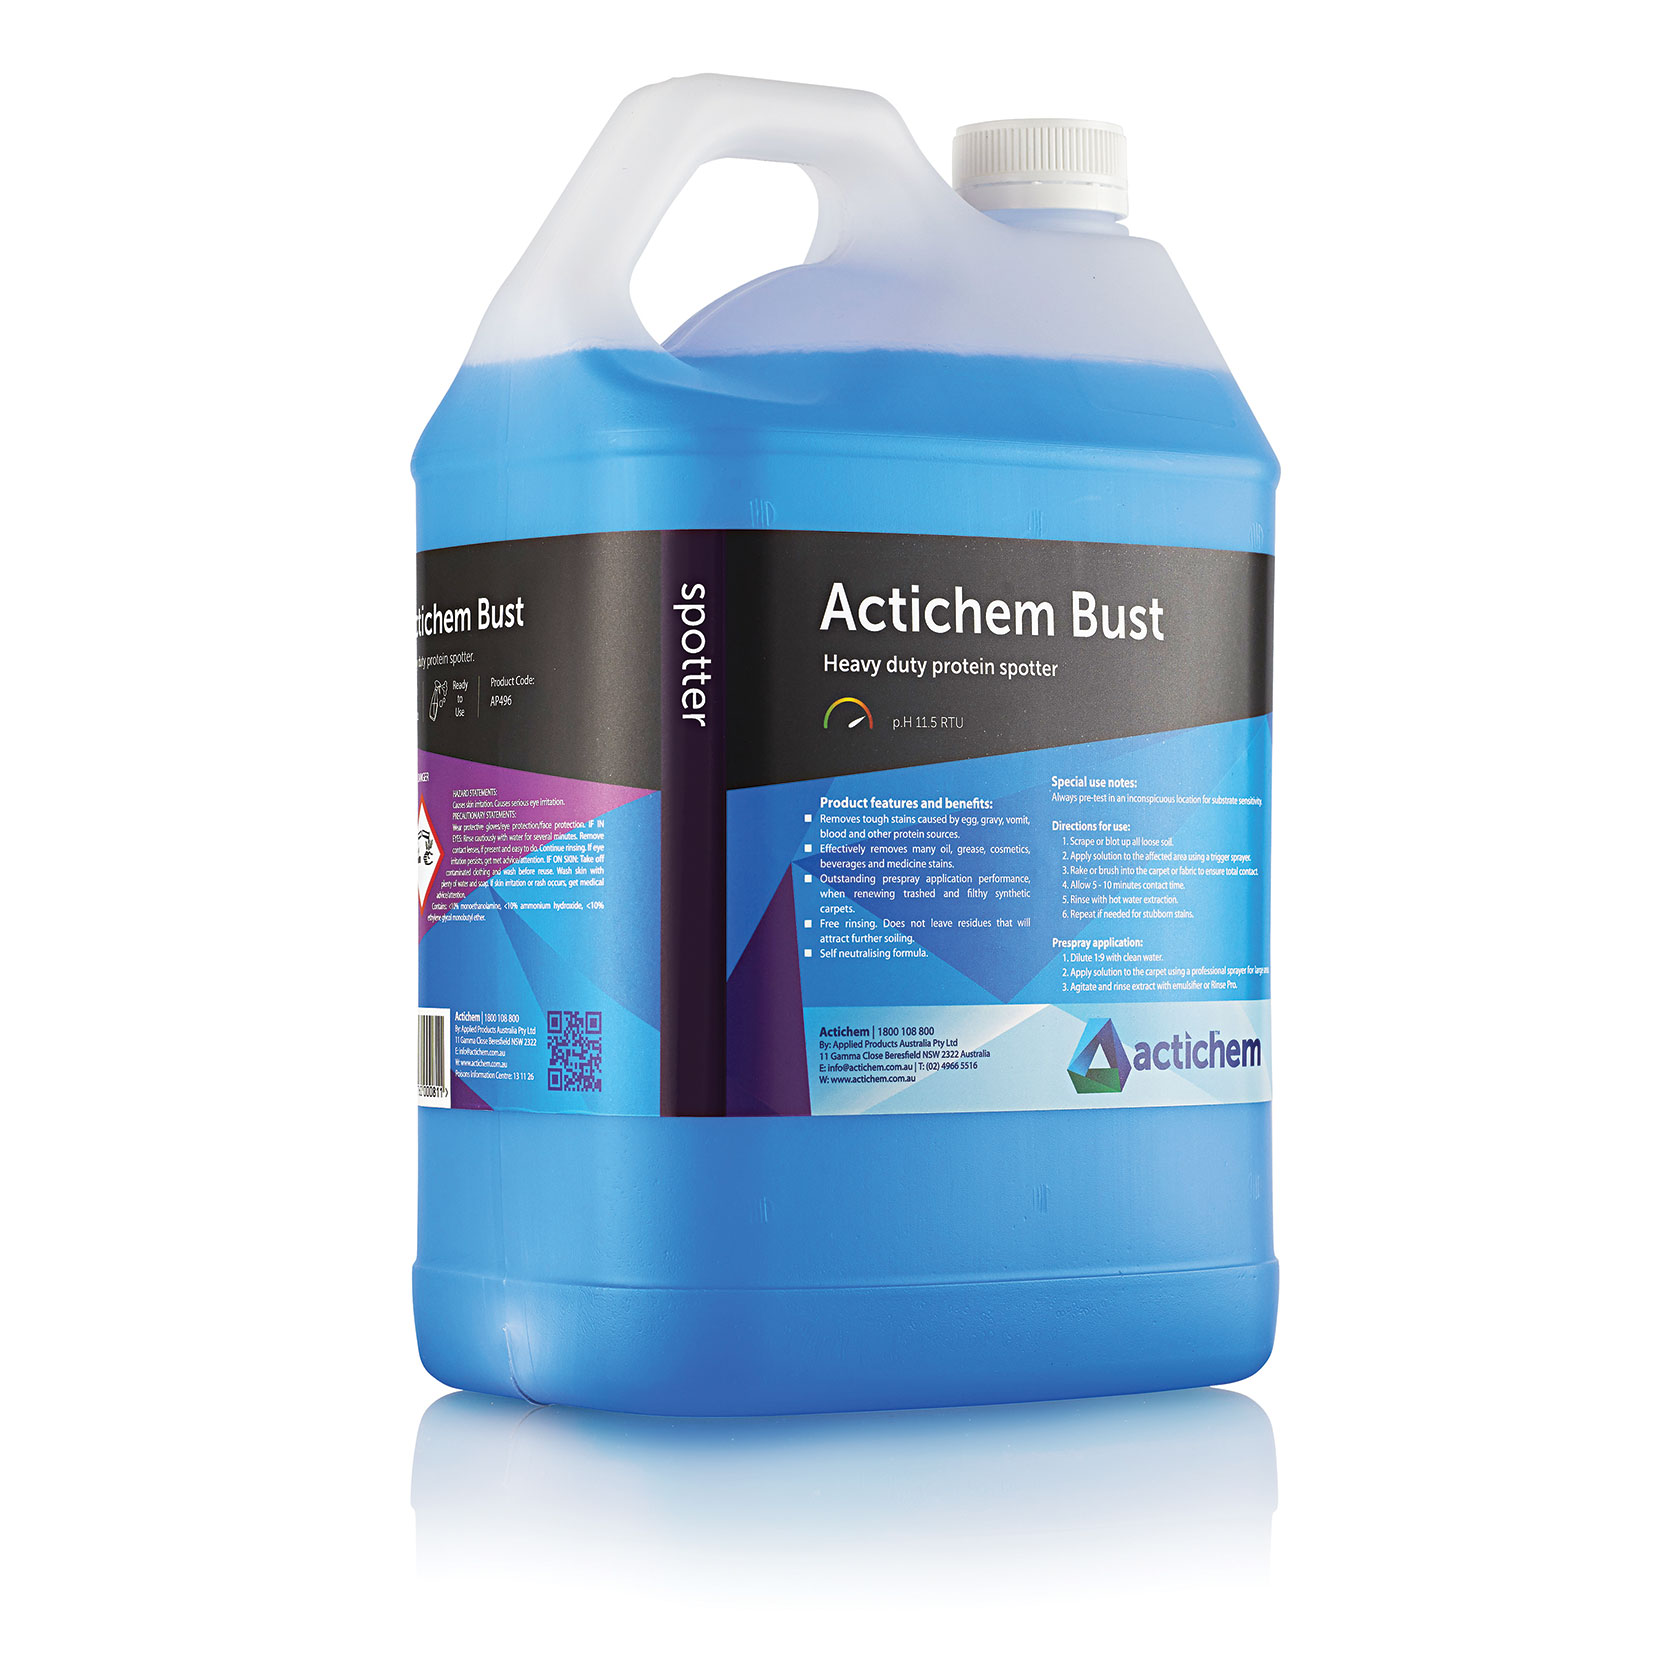 Actichem Bust Heavy duty protein & blood stain remover